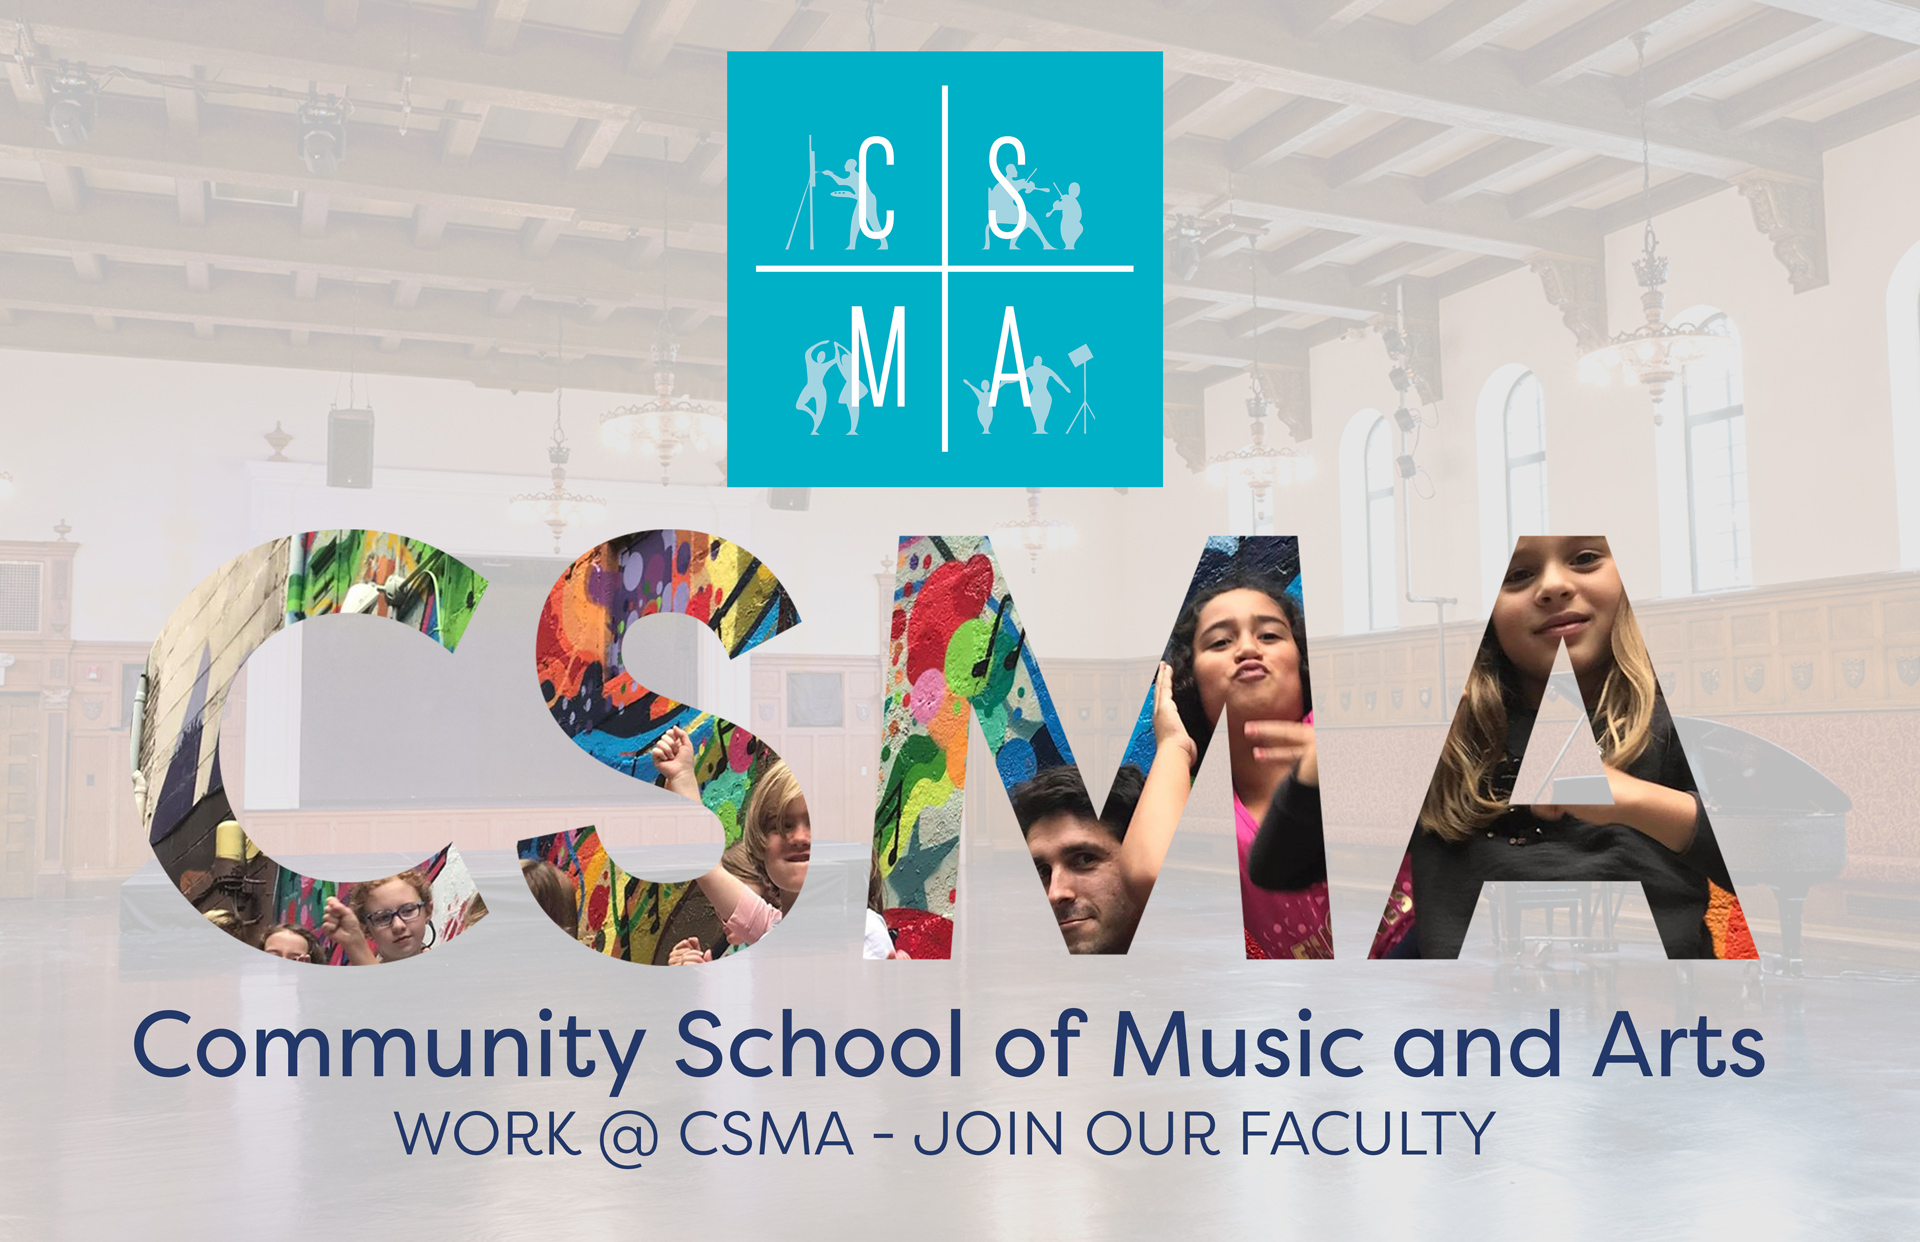 Work at CSMA - Join our Faculty